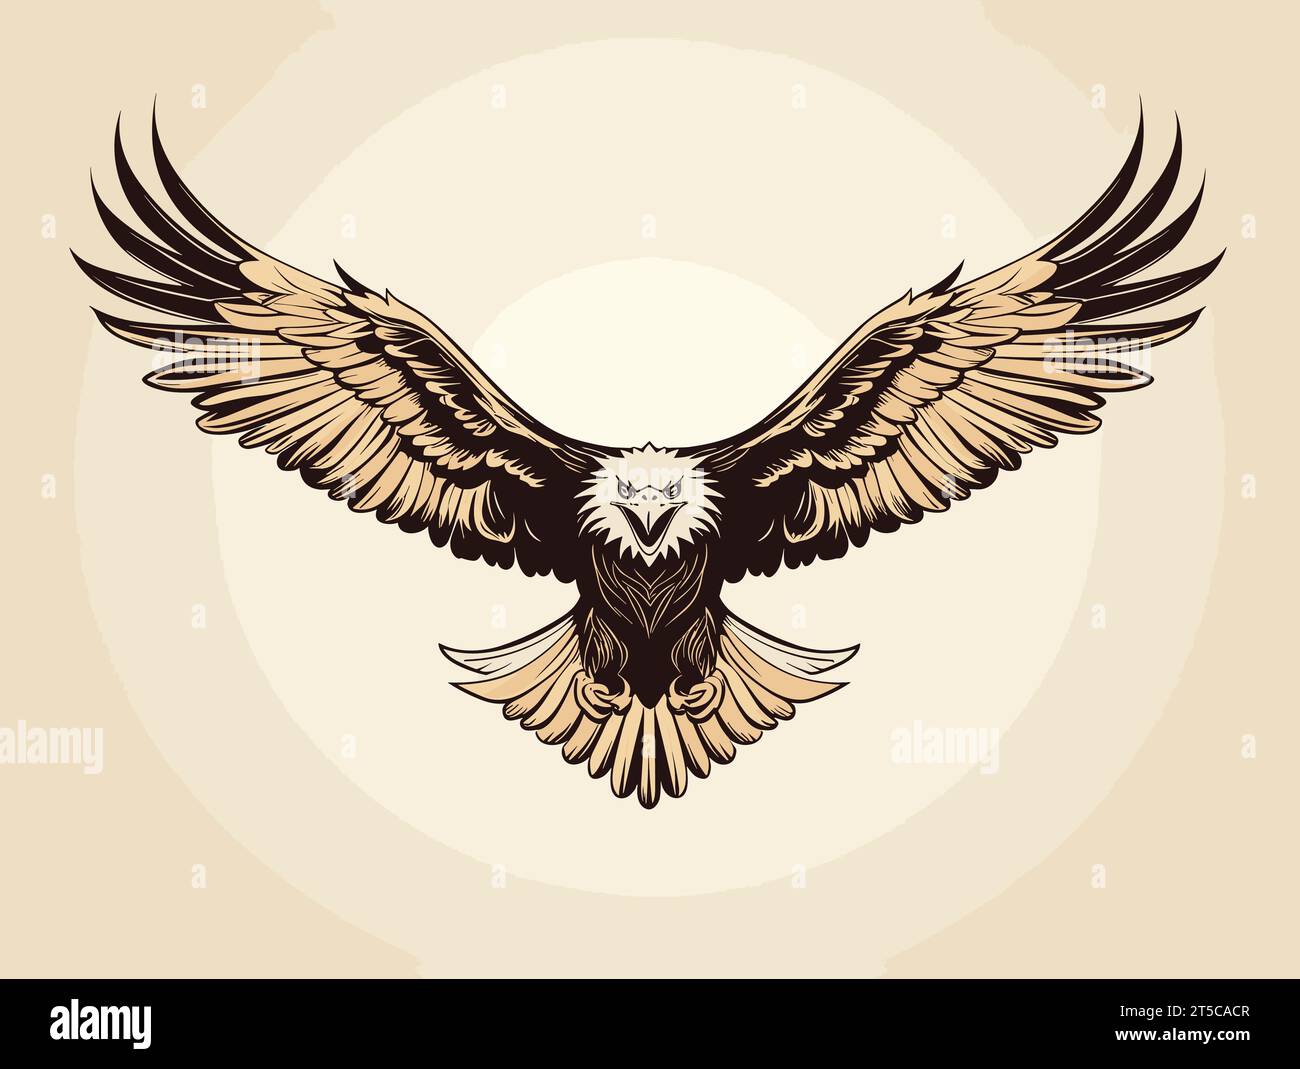 Drawing of Flying eagle logotype mascot in engraving style illustration separated, sweeping overdrawn lines. Stock Vector